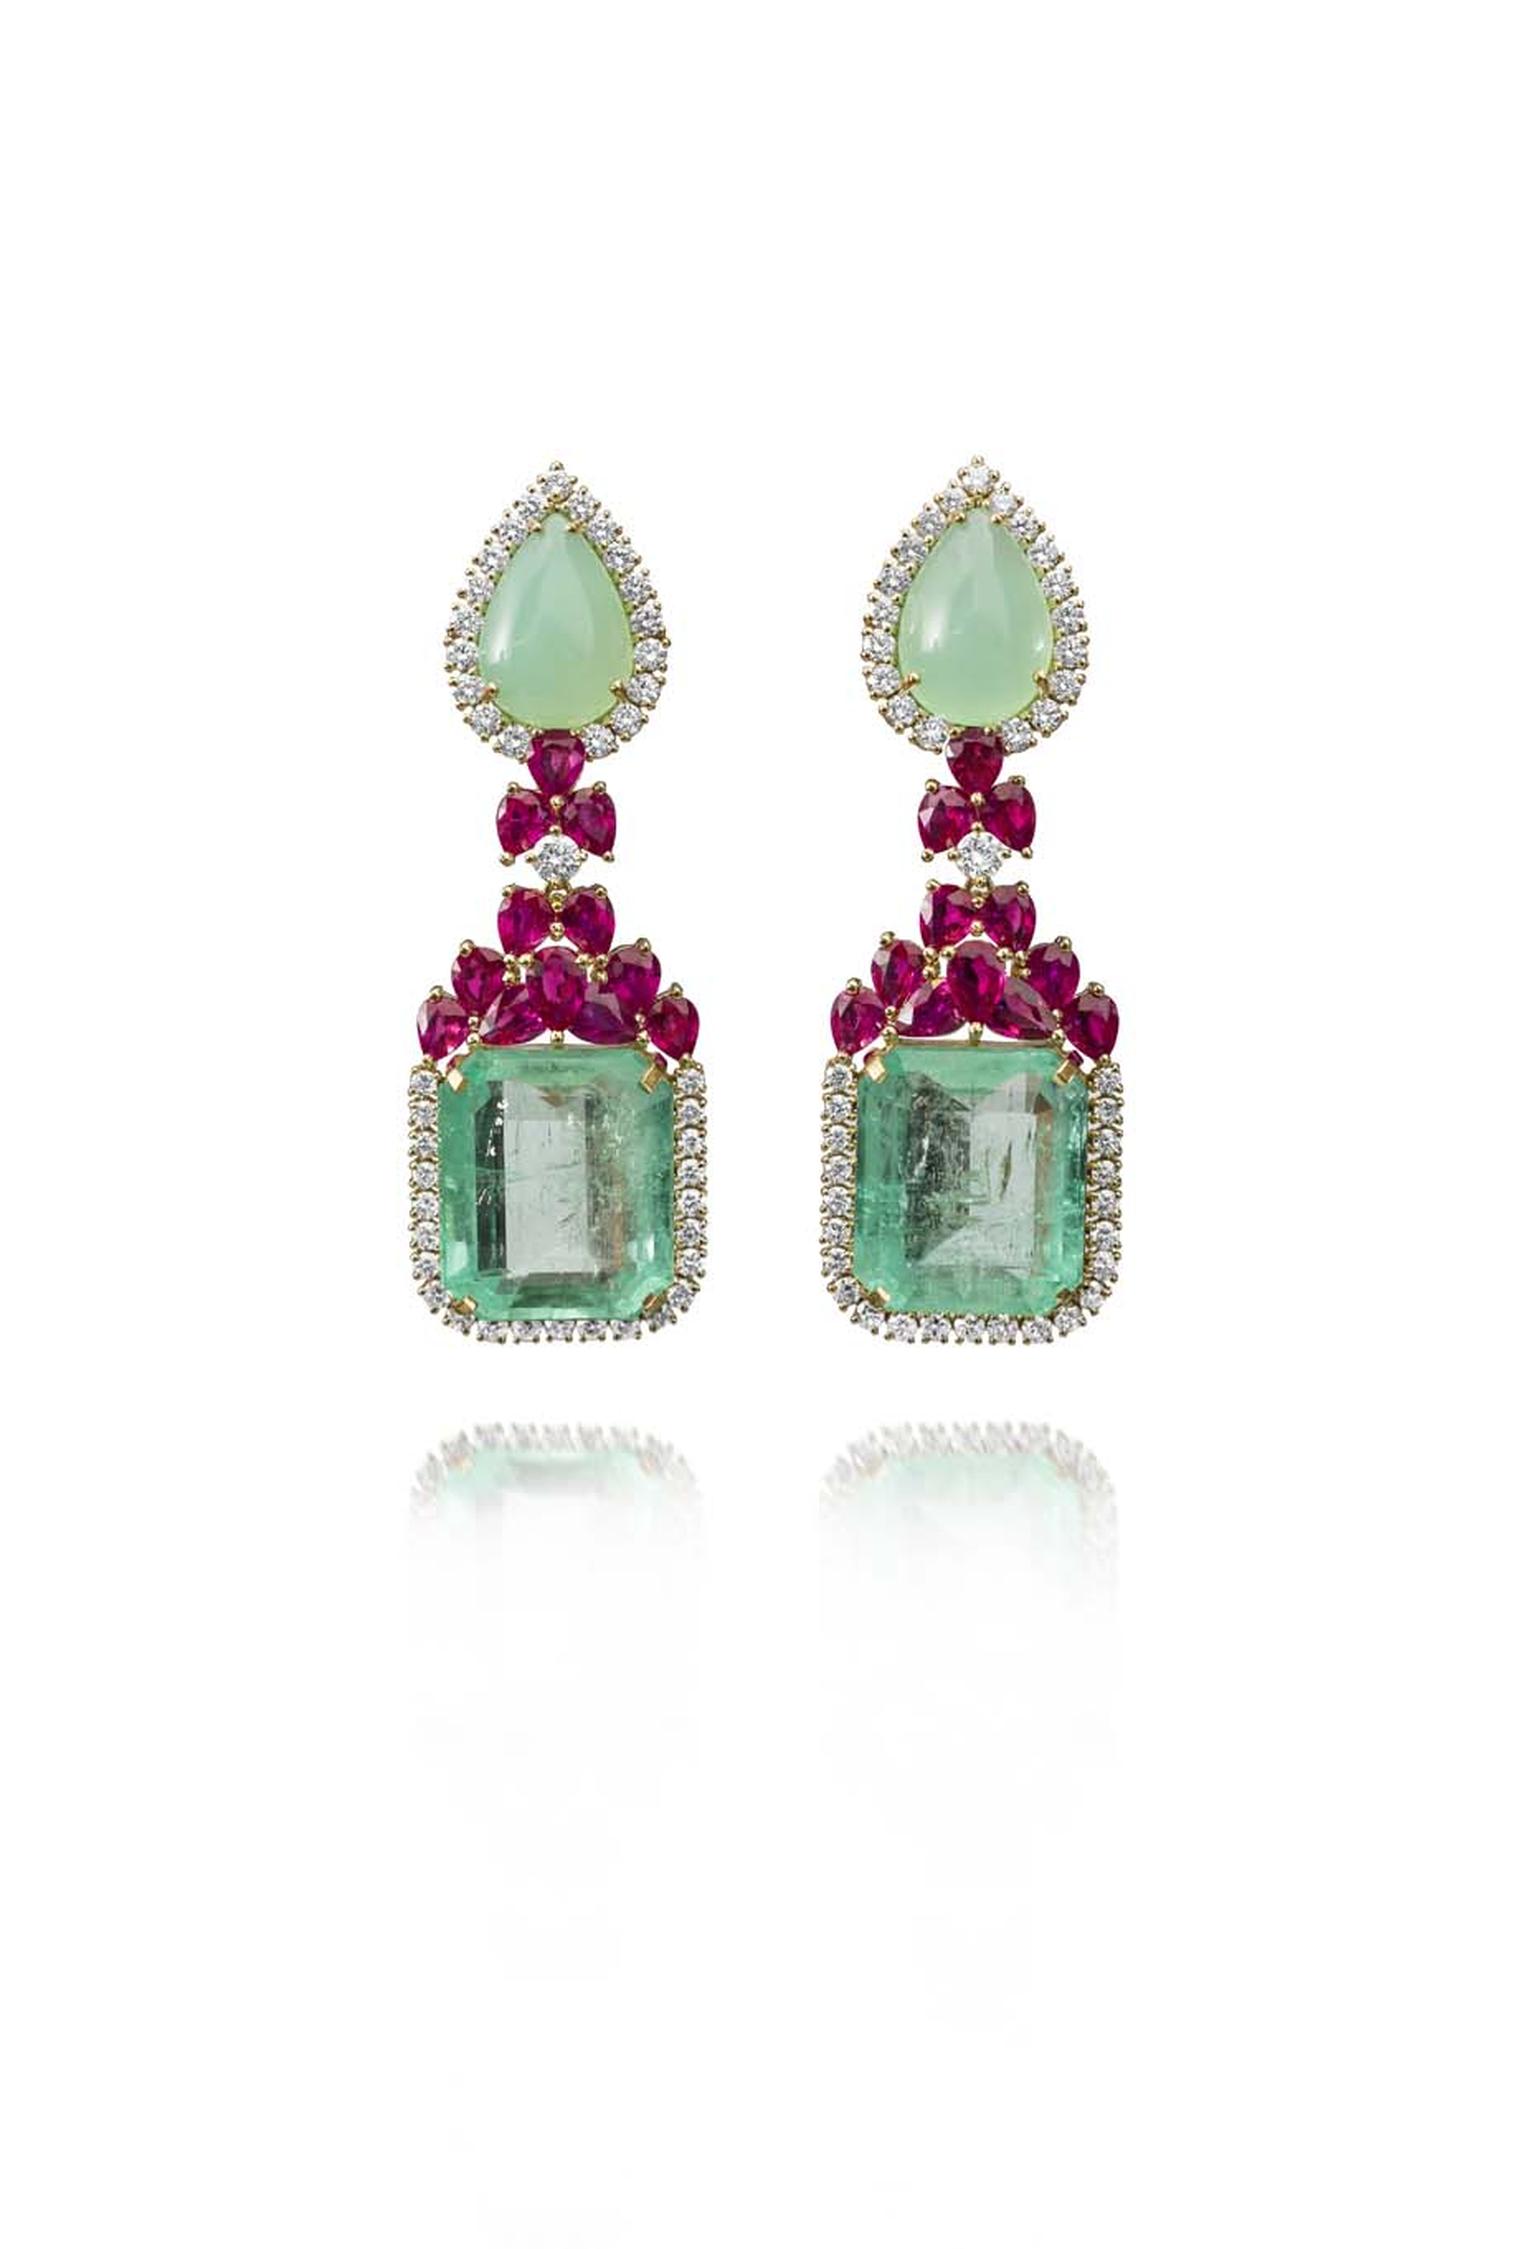 Farah Khan gold earrings featuring diamonds (3.46ct), rubies (9.02ct), chrysoprase (14.22ct) and emeralds (43.97ct).